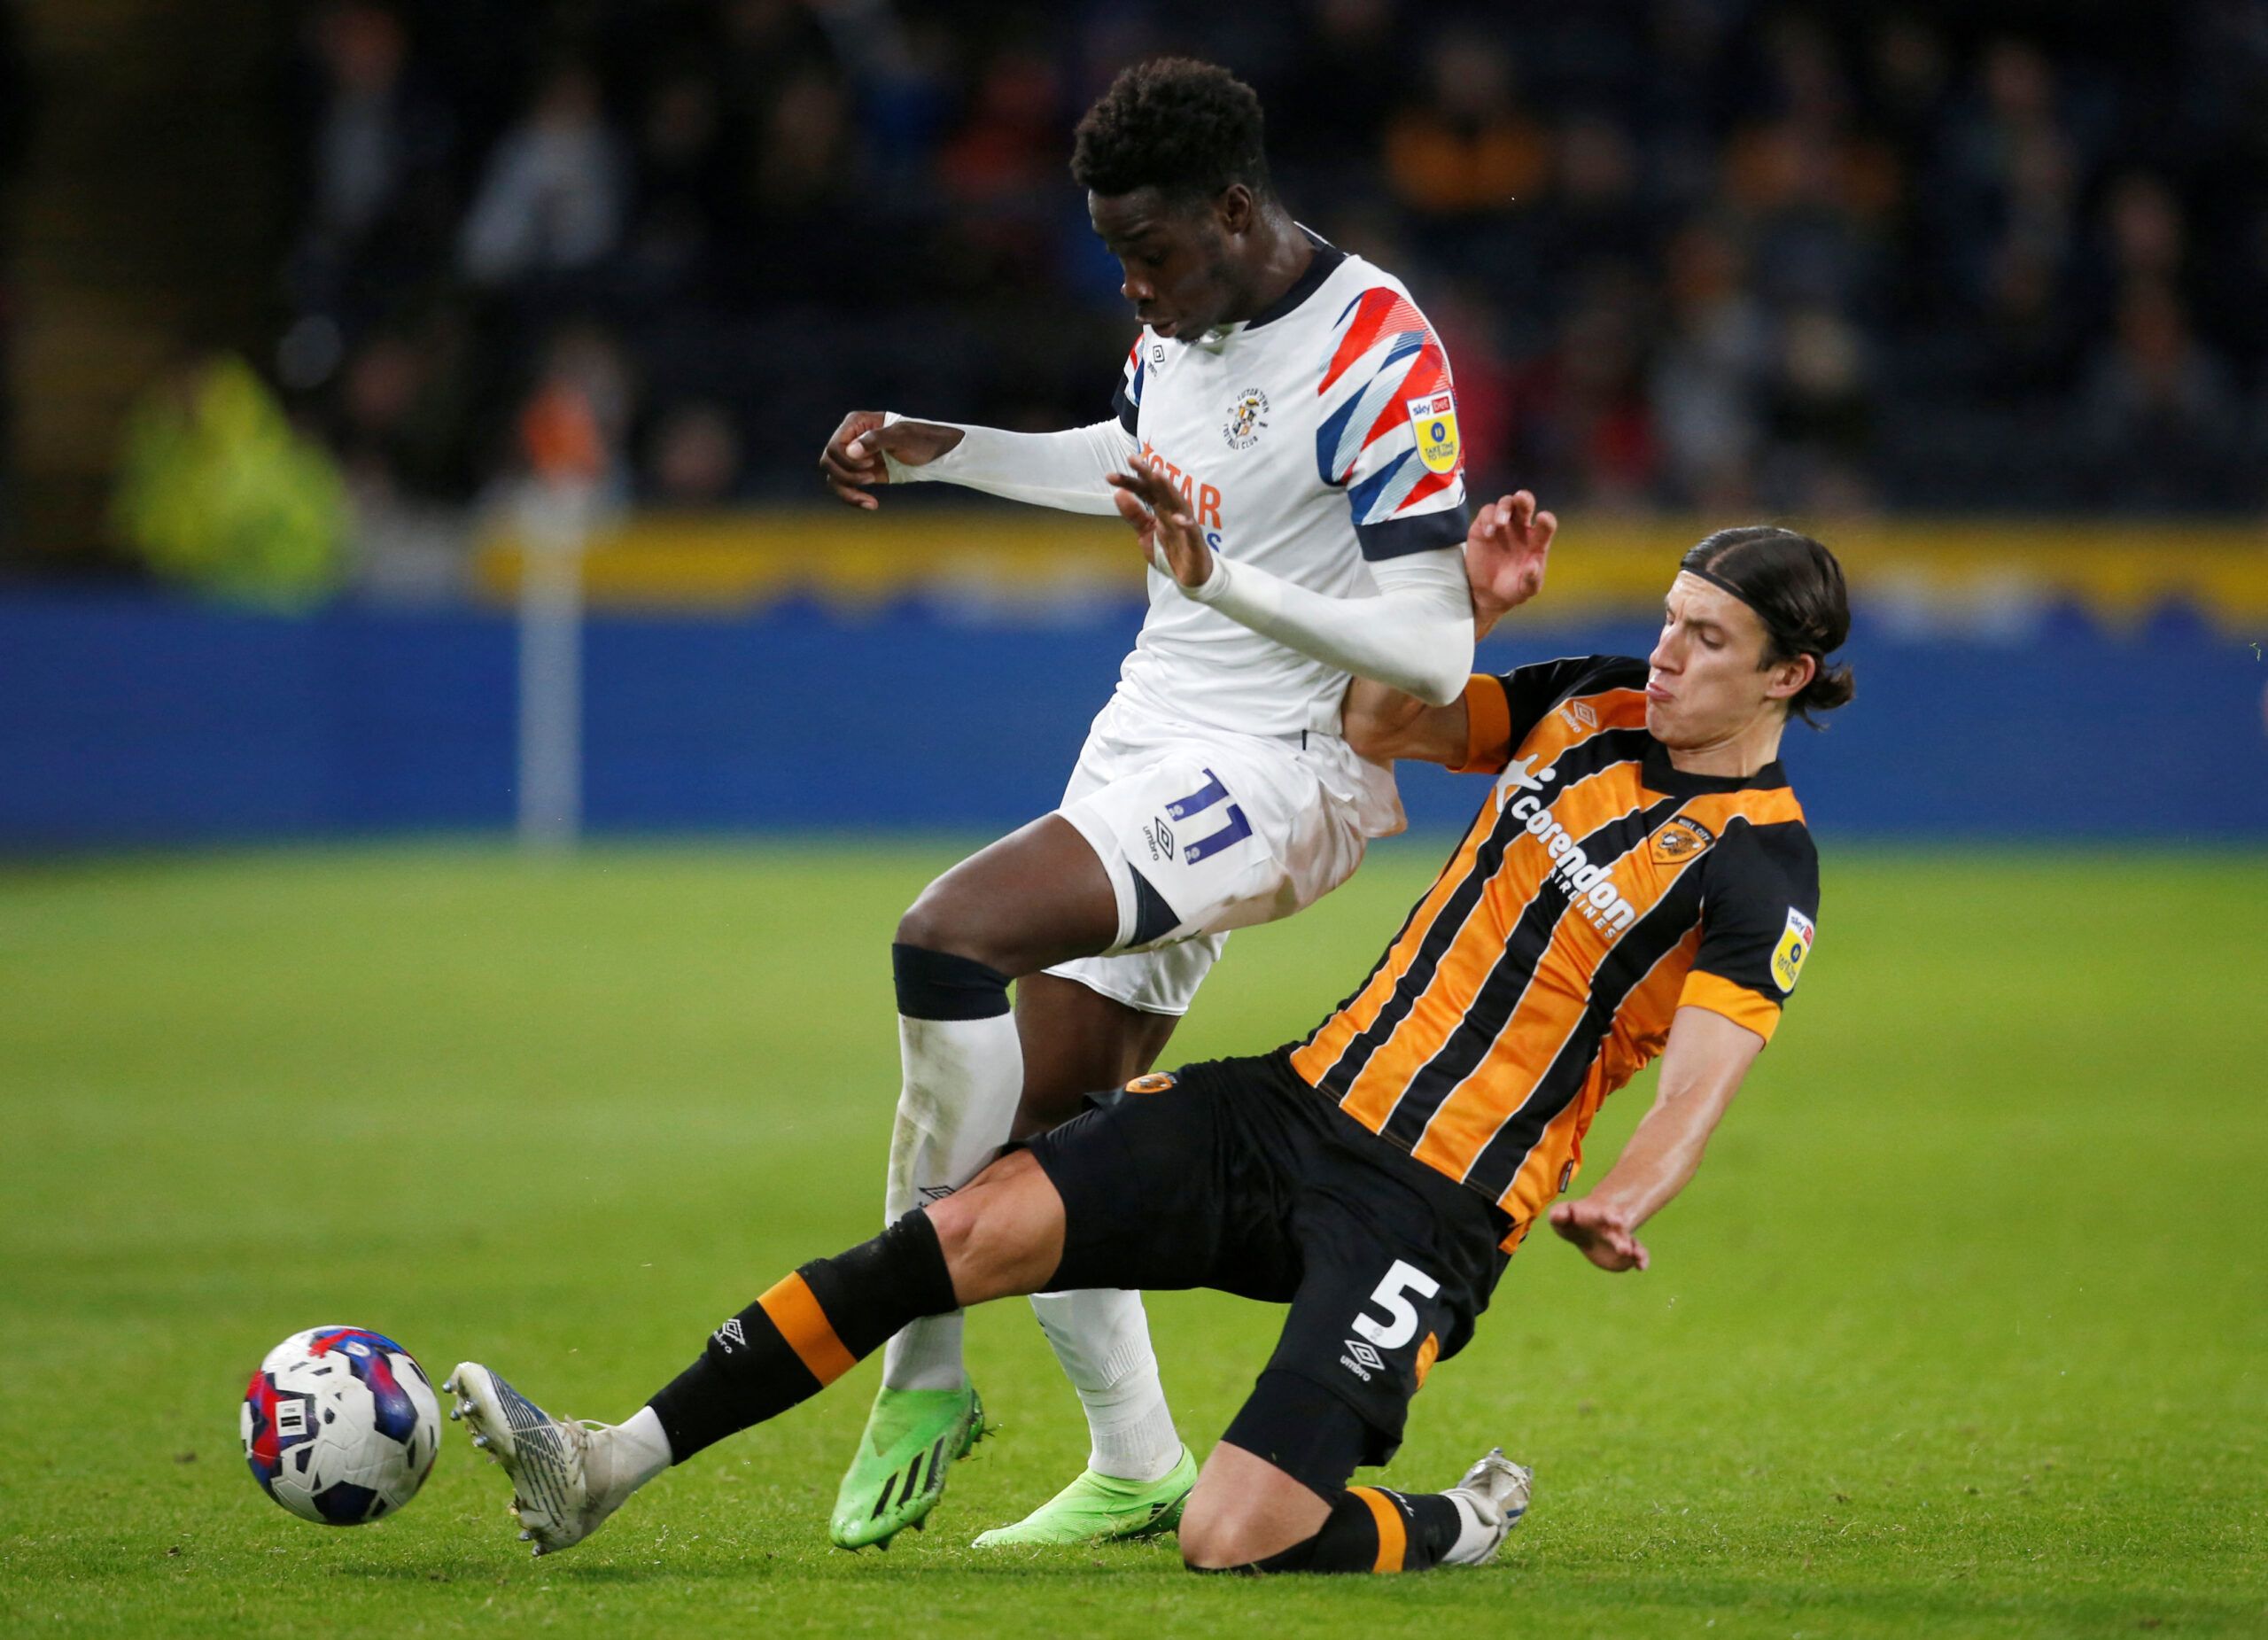 Soccer Football - Championship - Hull City v Luton Town - MKM Stadium, Hull, Britain - September 30, 2022 Luton Town's Elijah Adebayo and Hull City's Alfie Jones in action Action Images/Ed Sykes  EDITORIAL USE ONLY. No use with unauthorized audio, video, data, fixture lists, club/league logos or 